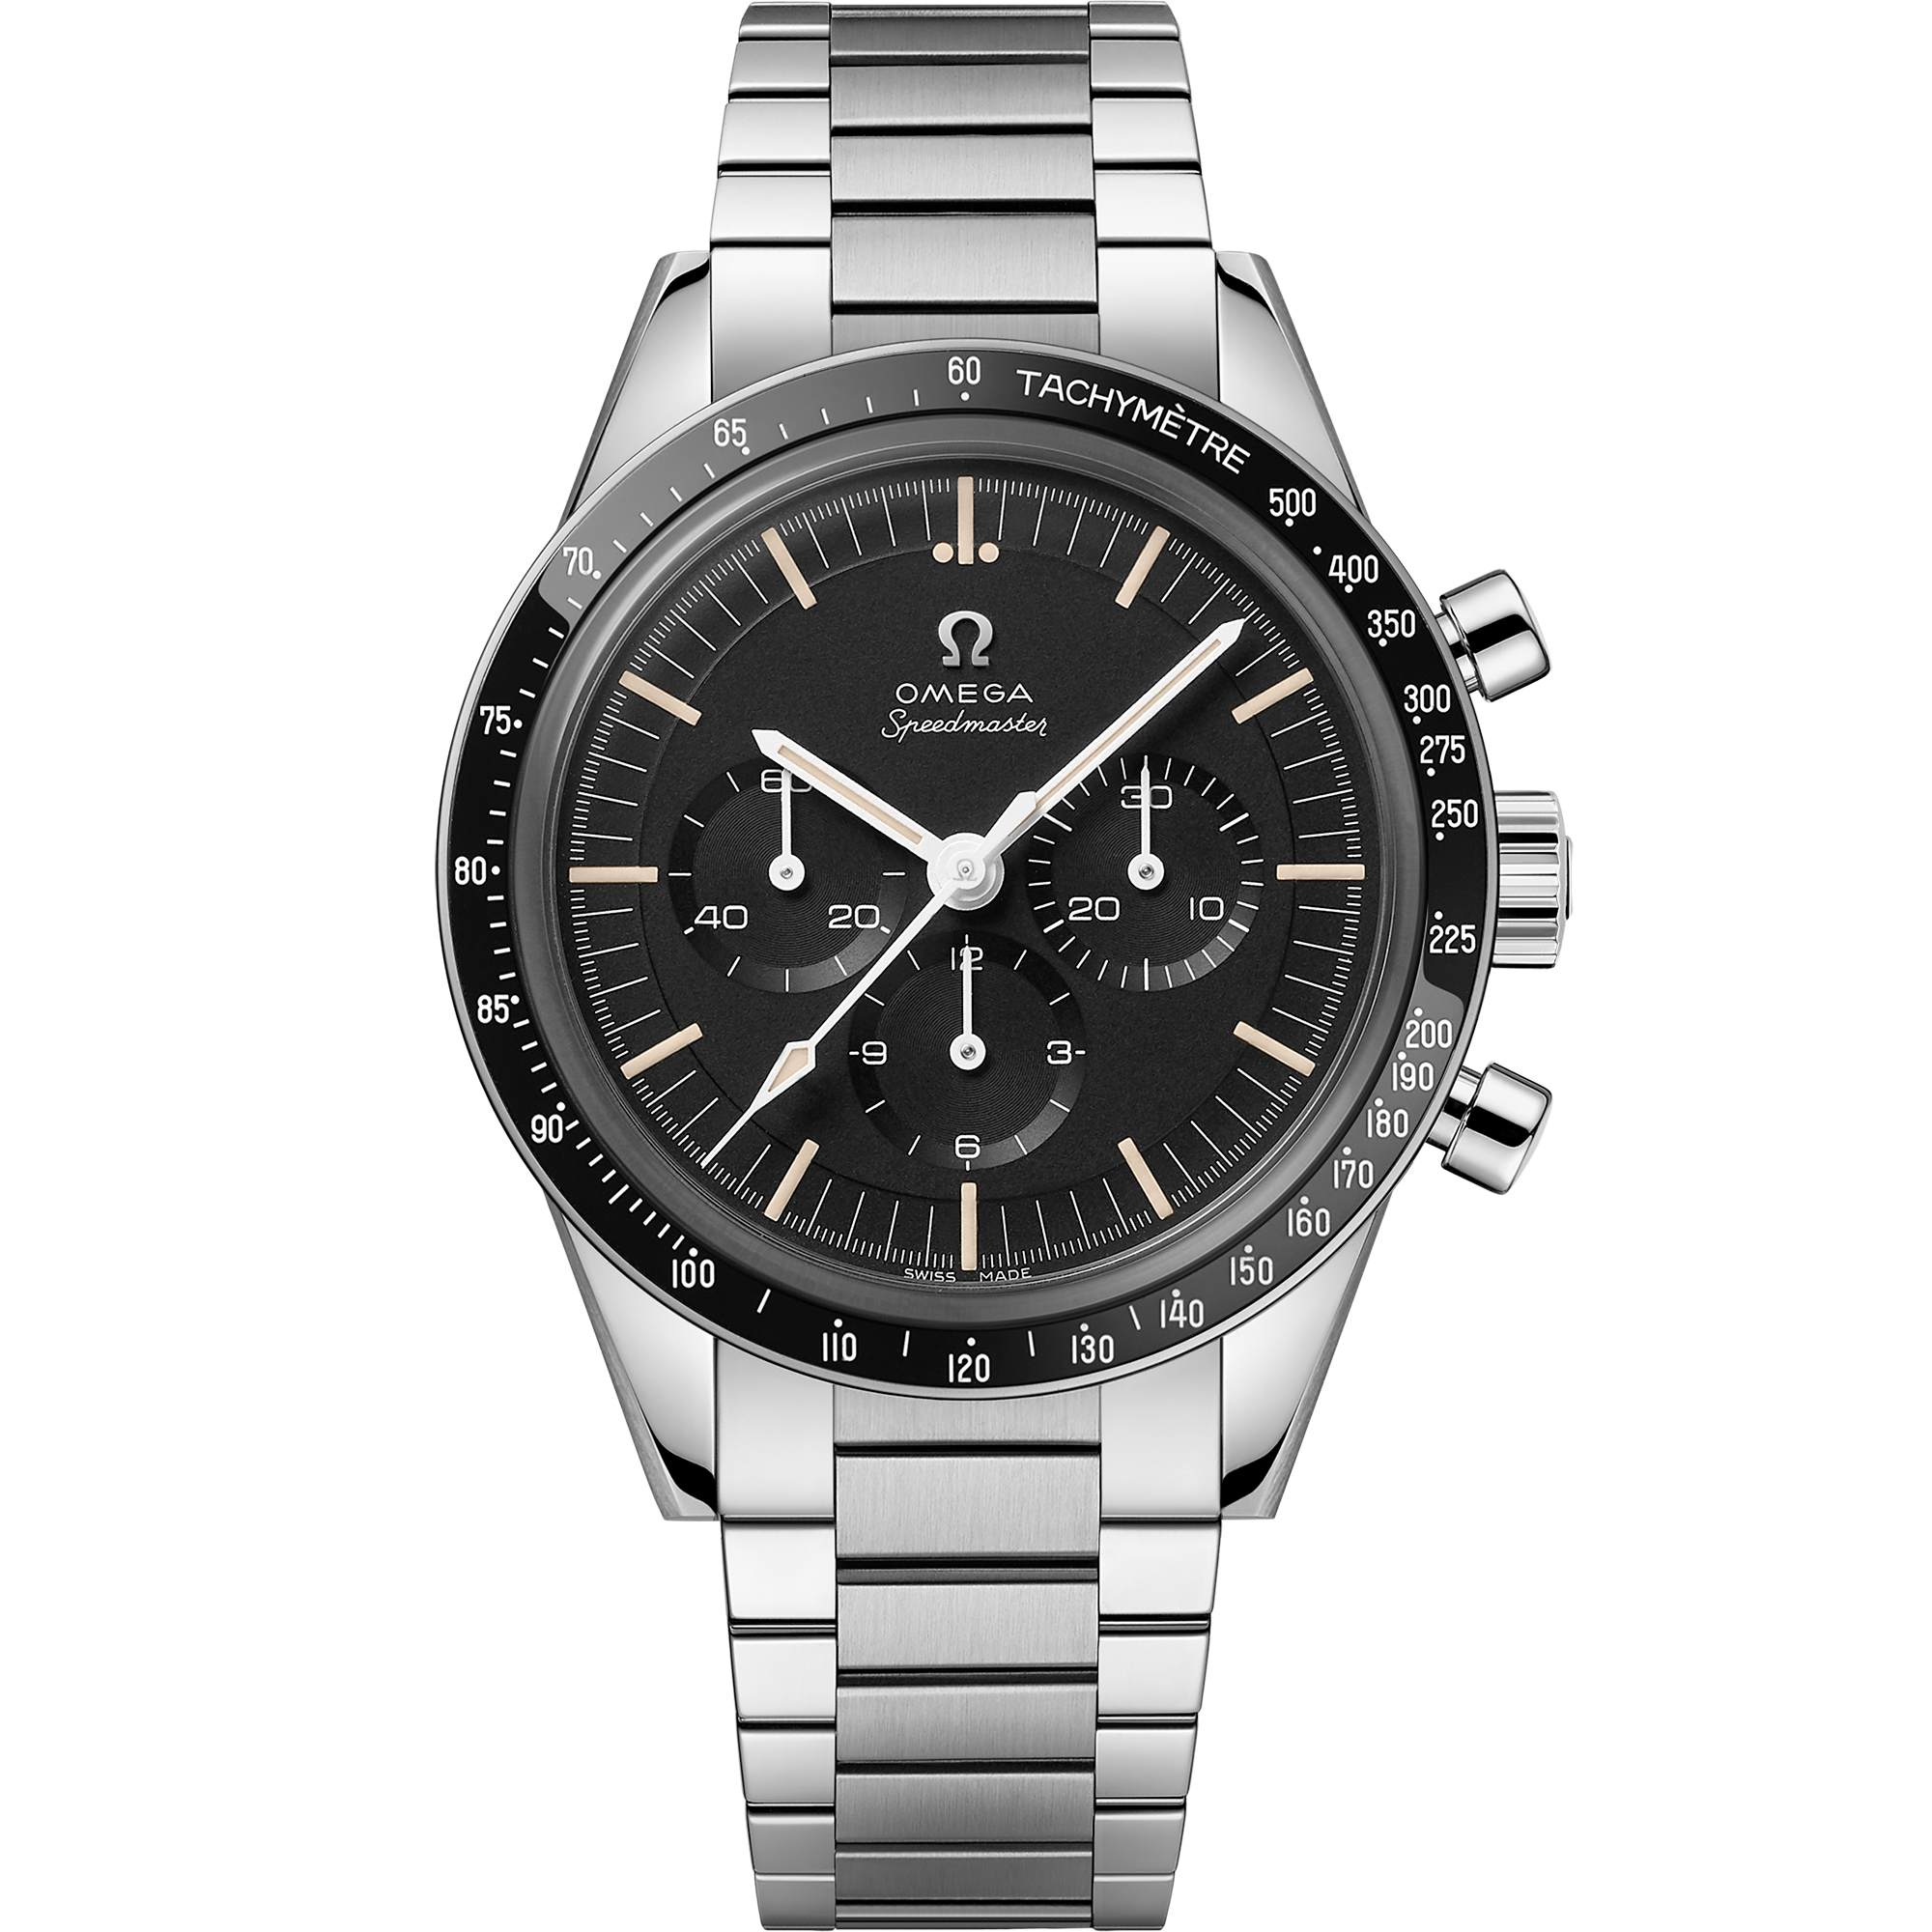 Omega 321 Chronograph – The Dialed In Watchmaker